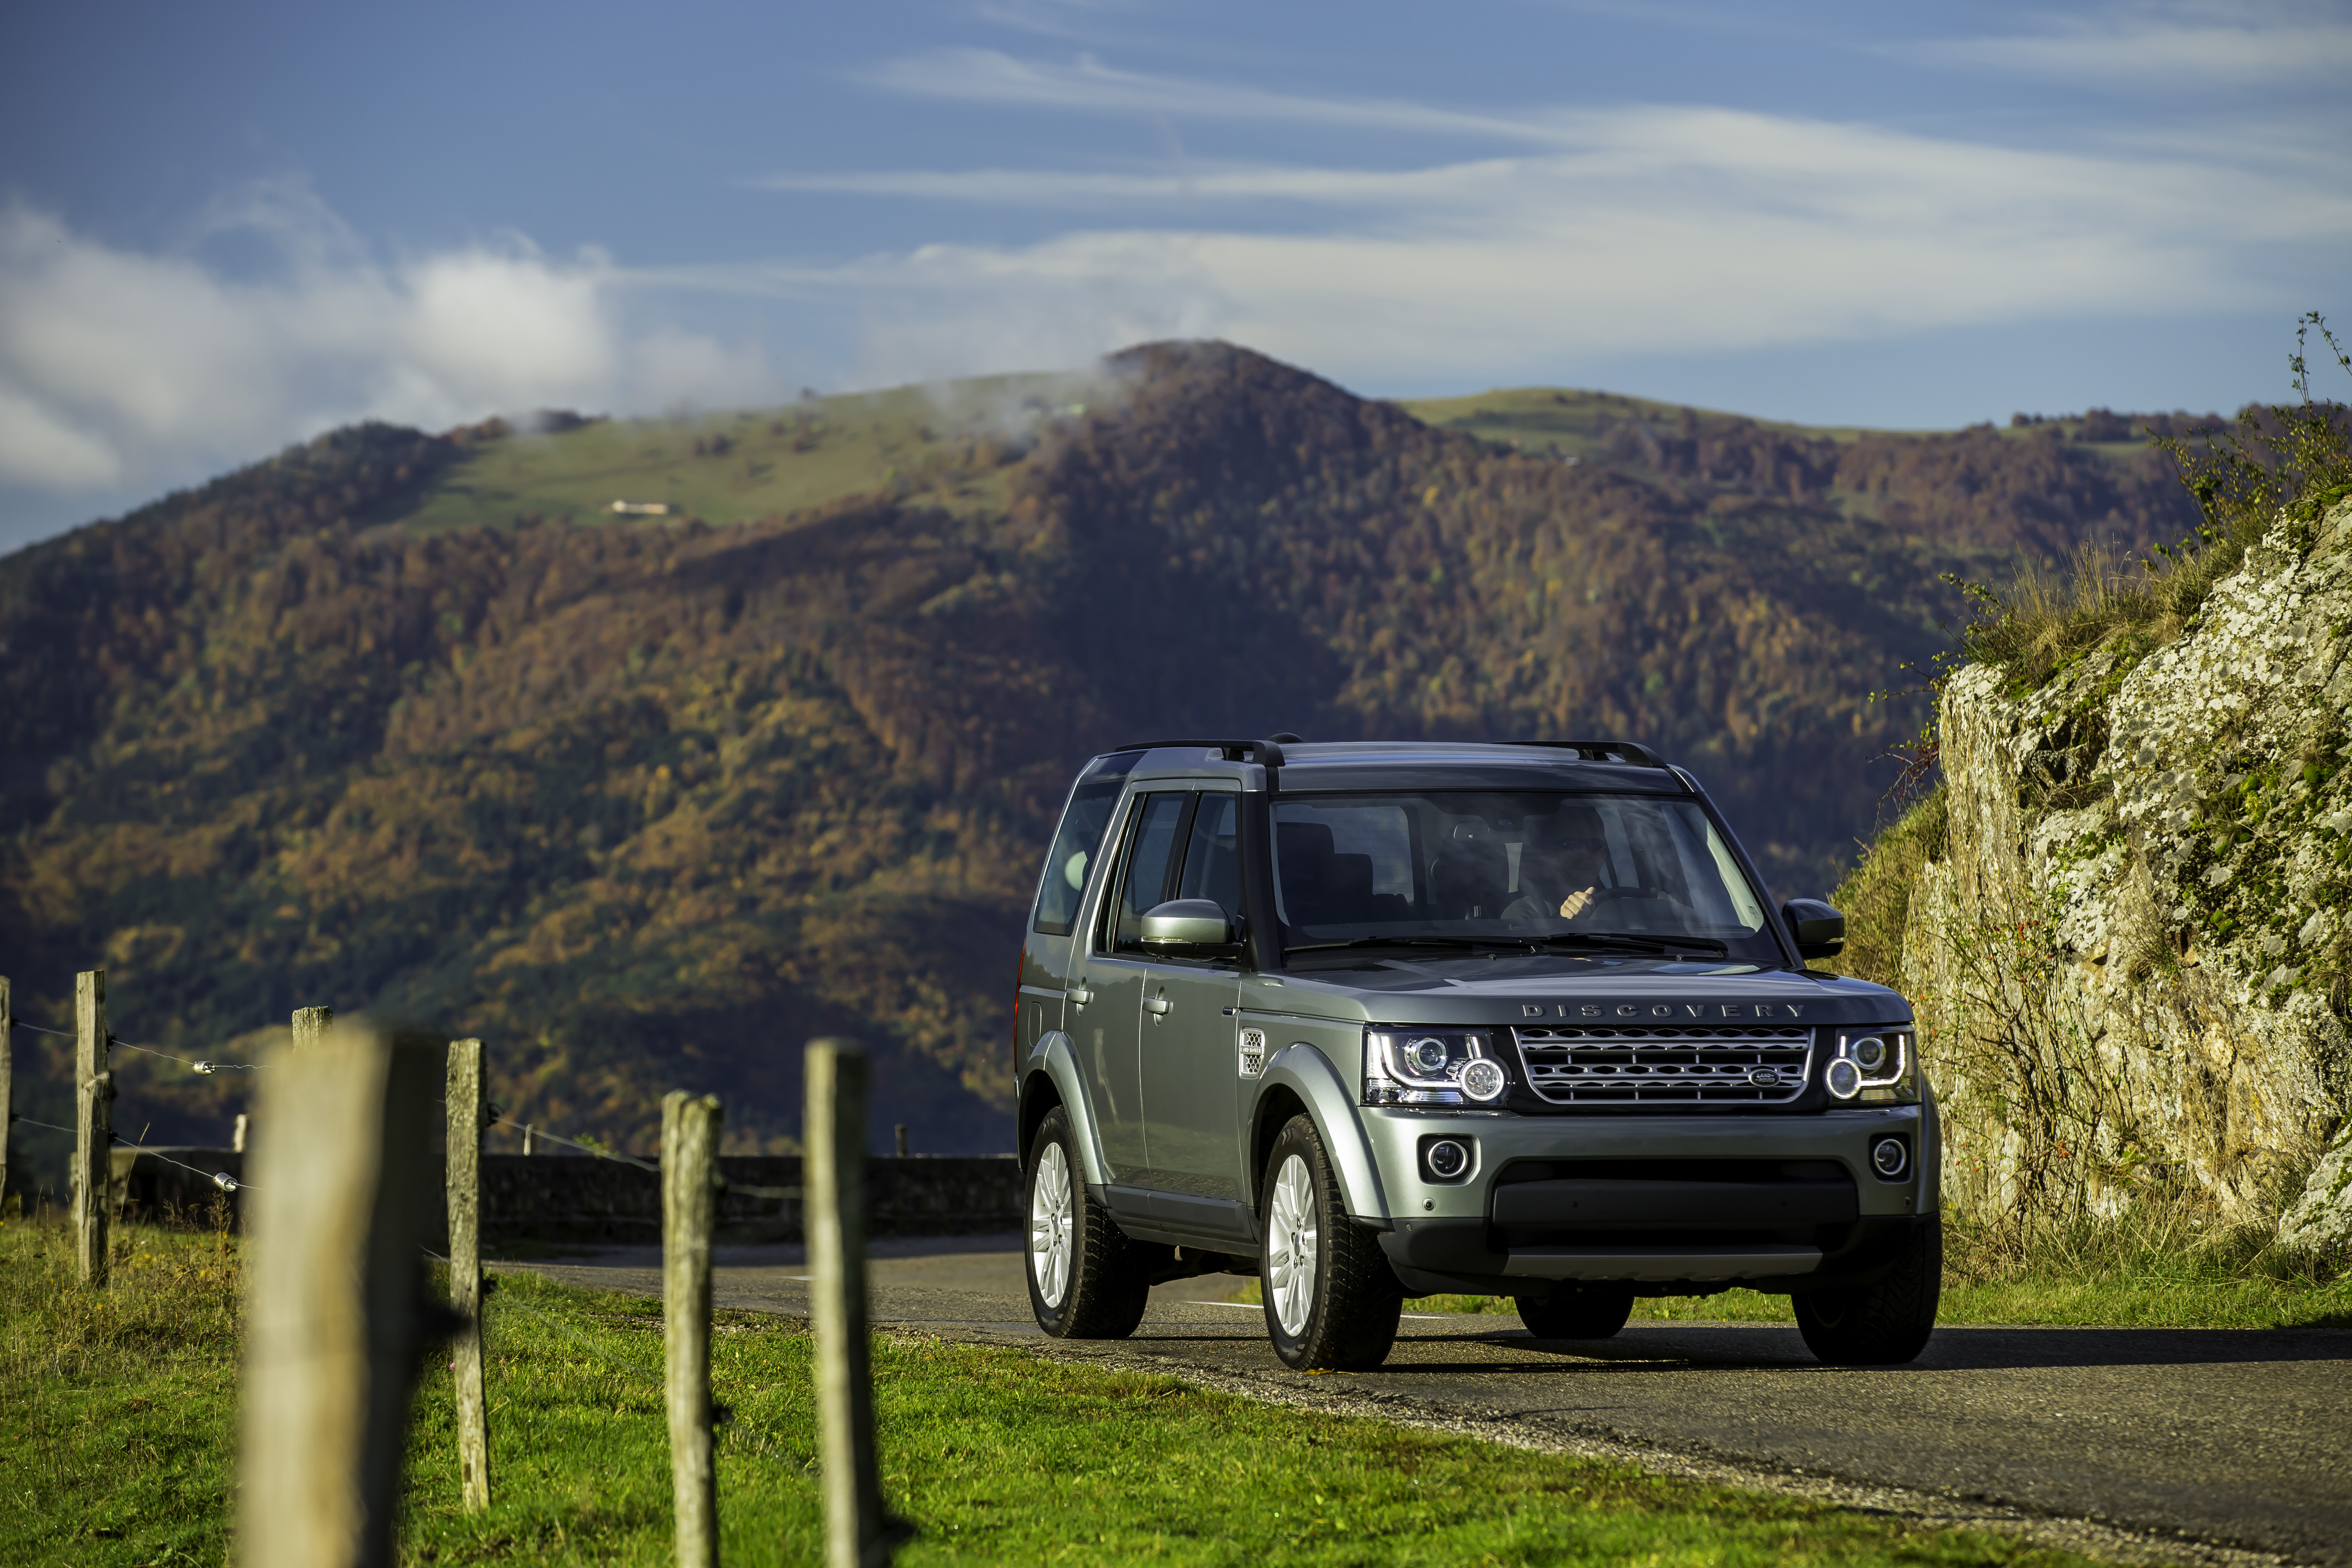 Дискавери 720. Land Rover Discovery 4. Land Rover Дискавери 4. Ленд Ровер Дискавери 2014. Ленд Ровер Дискавери 4 2016.